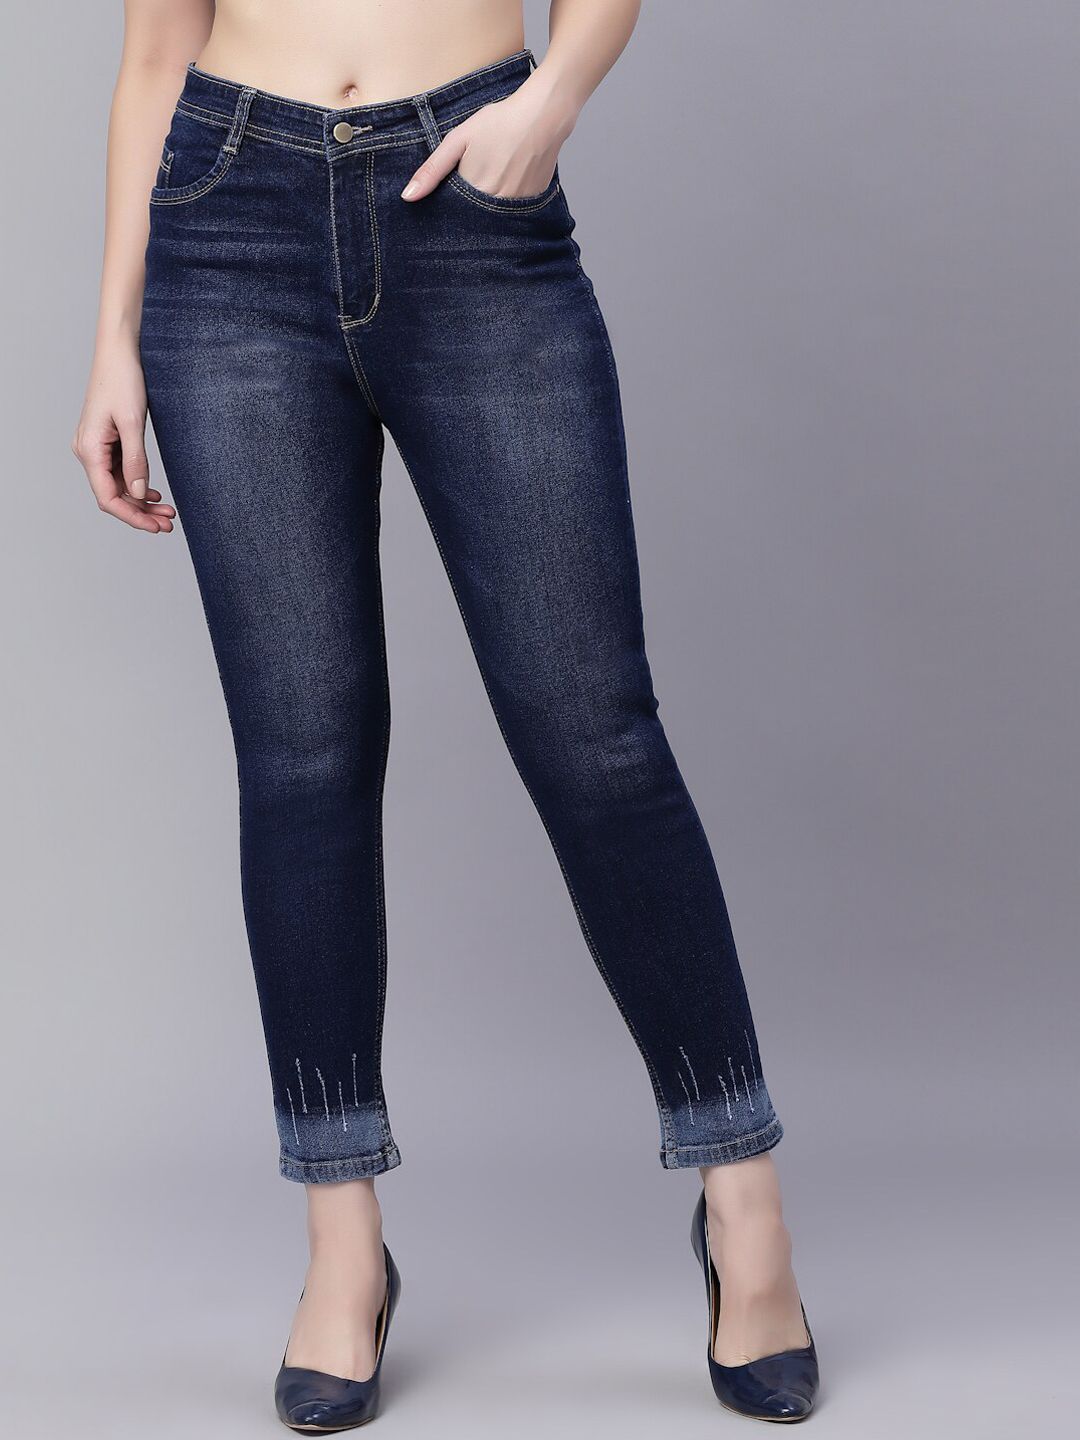 KASSUALLY Women Blue Skinny Fit Stretchable Jeans Price in India